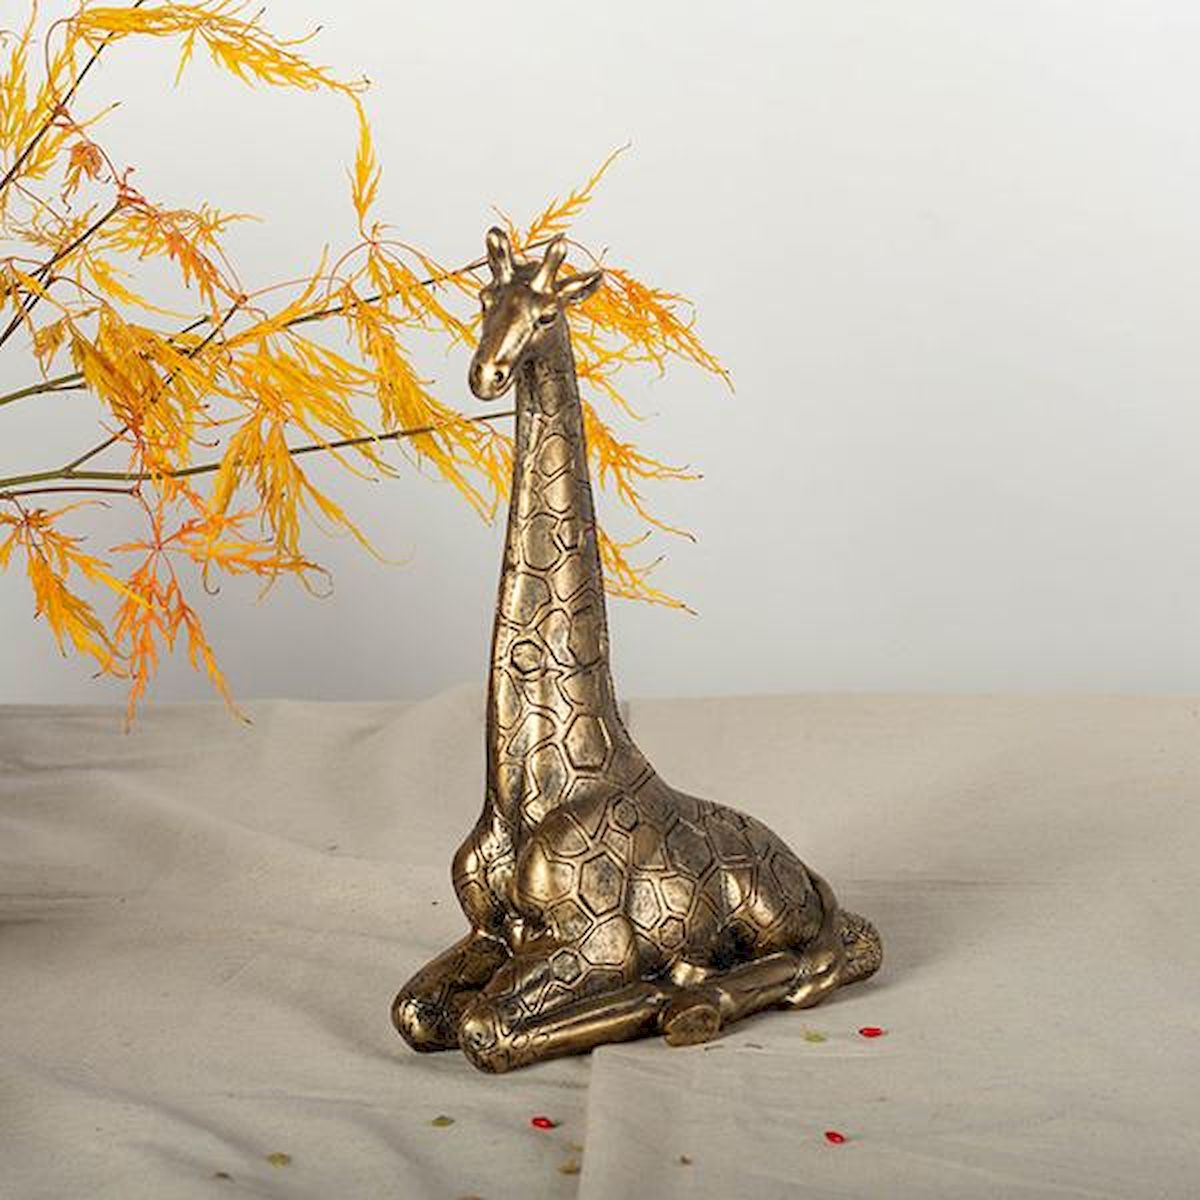 Picture of Forpost FP-LCD-349 Decorative Laying Down Giraffe Figurine